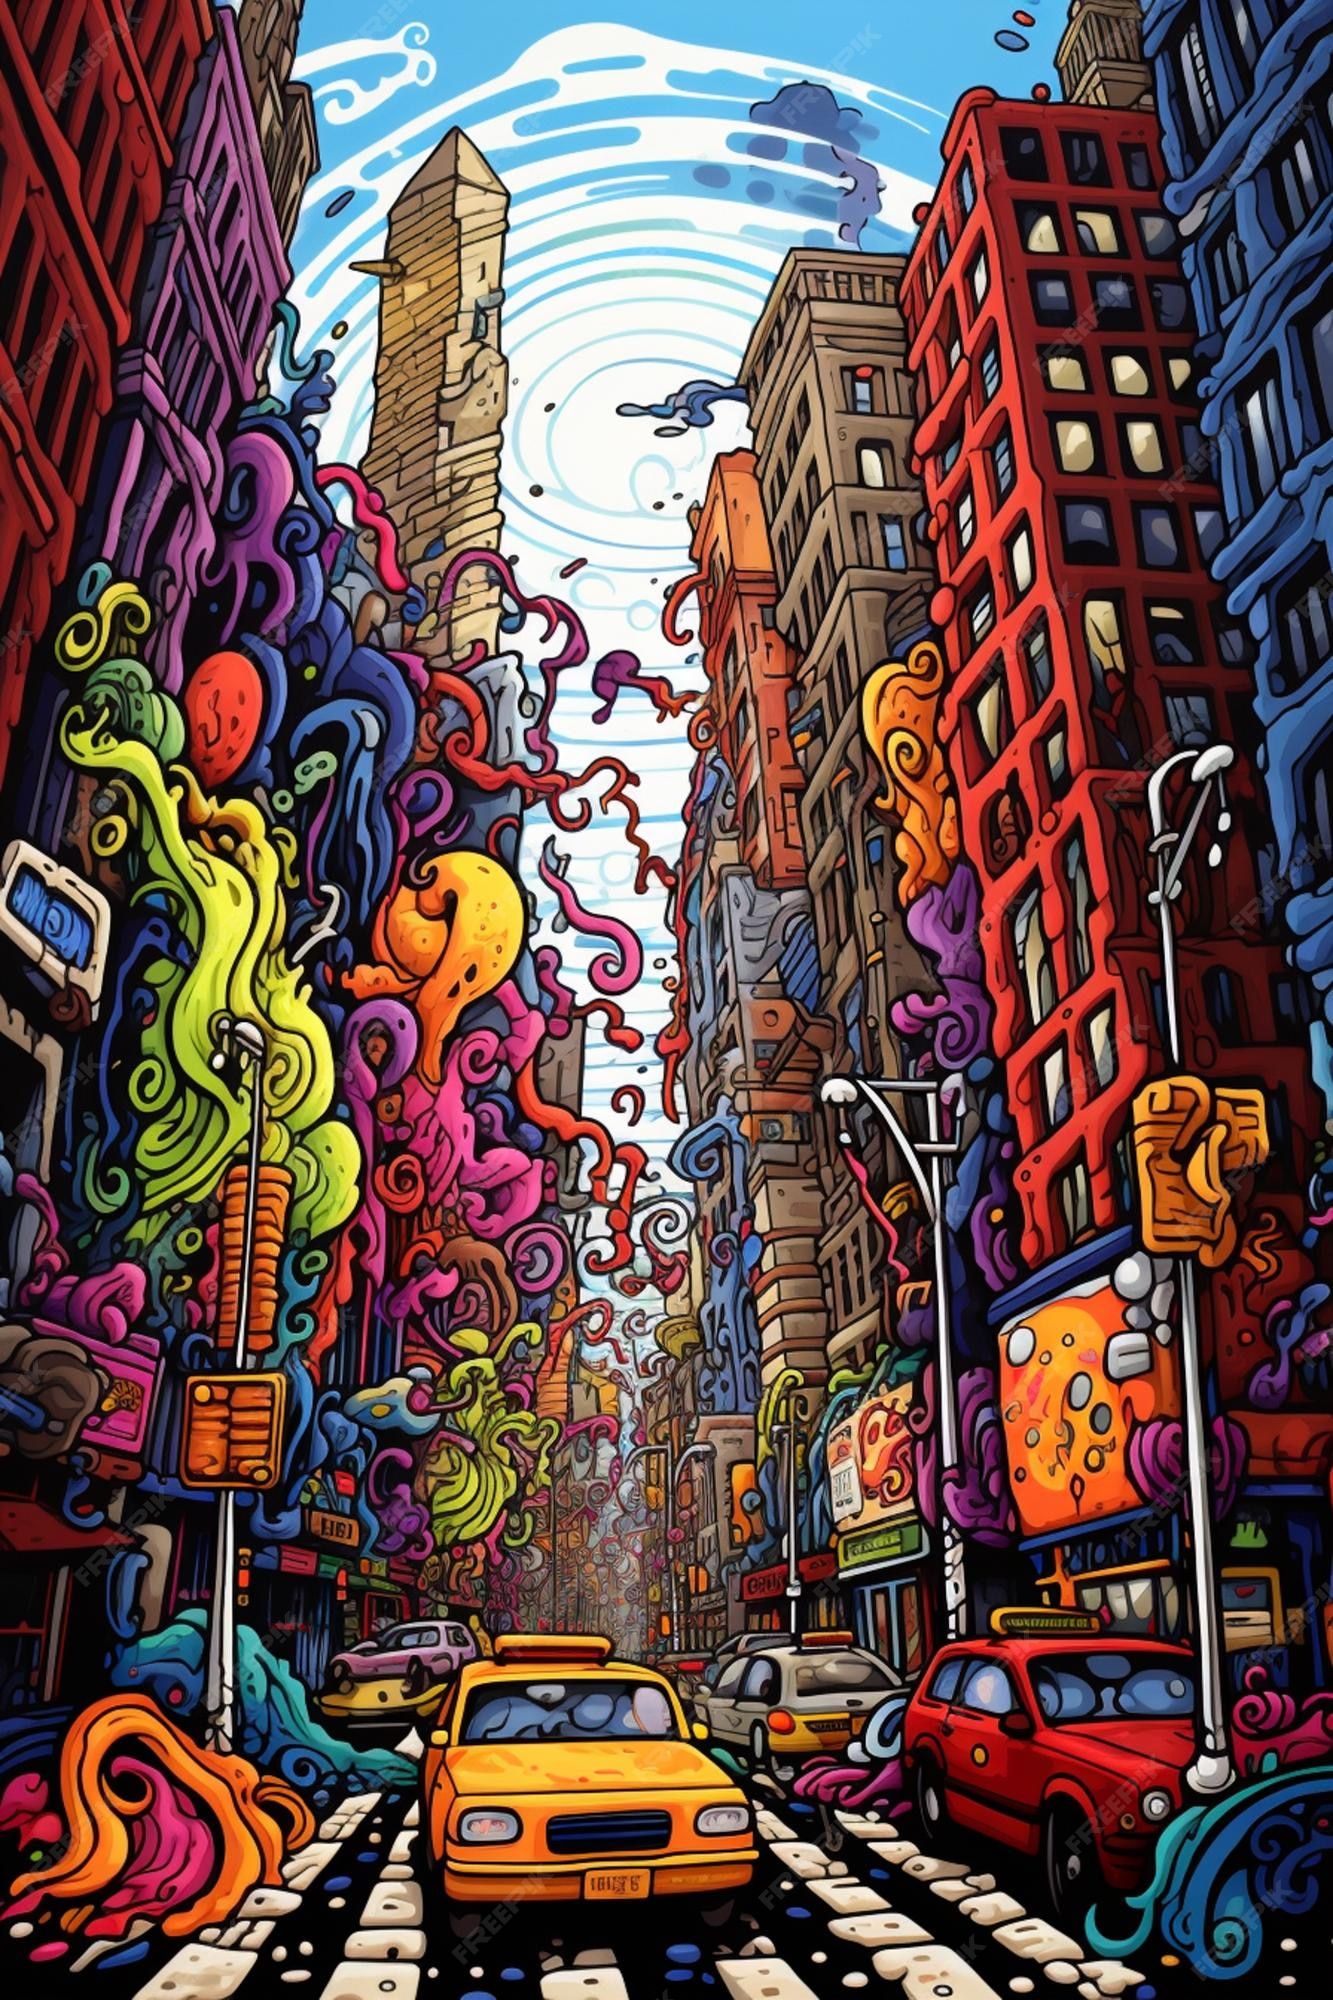 A digital drawing of a street in New York City with tall buildings and taxis. - Street art